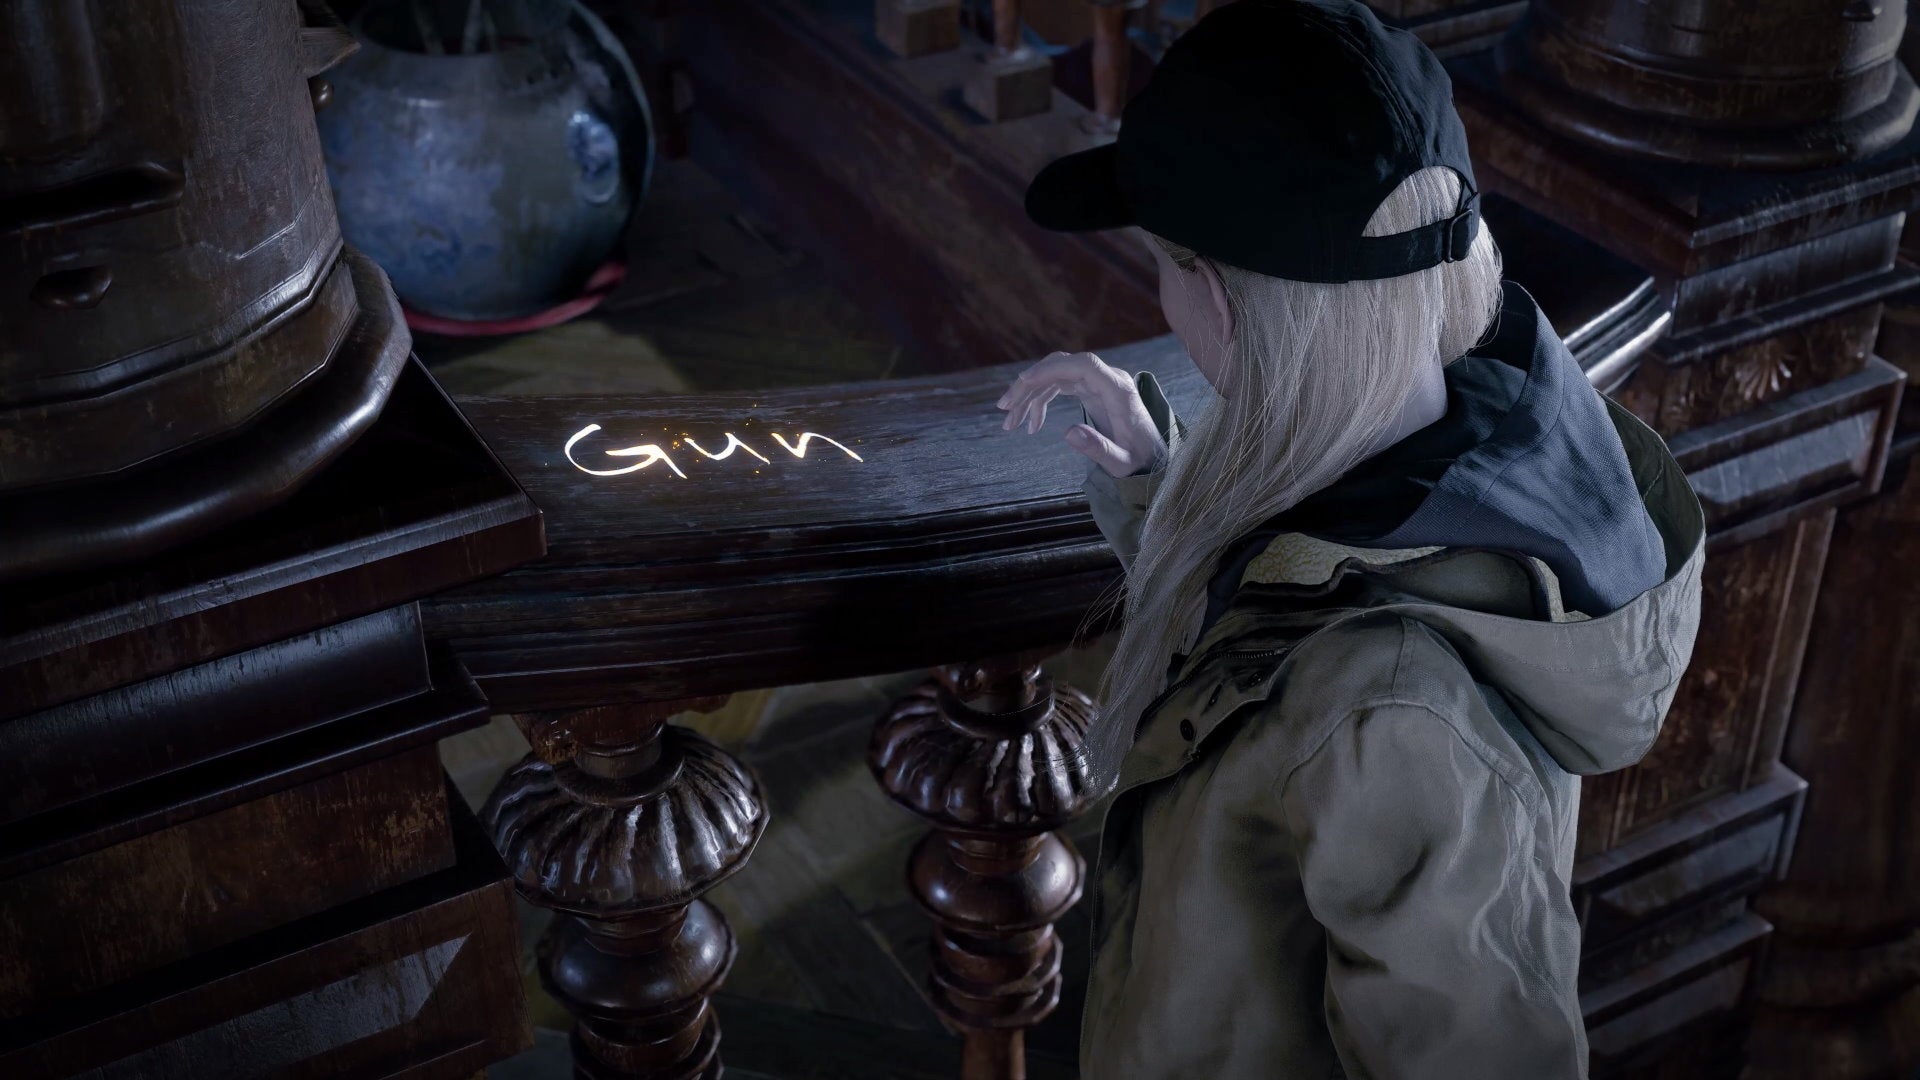 Rose looks at a bannister with the word 'gun' written on it in glowing letters in Resident Evil Village's Shadows Of Rose DLC